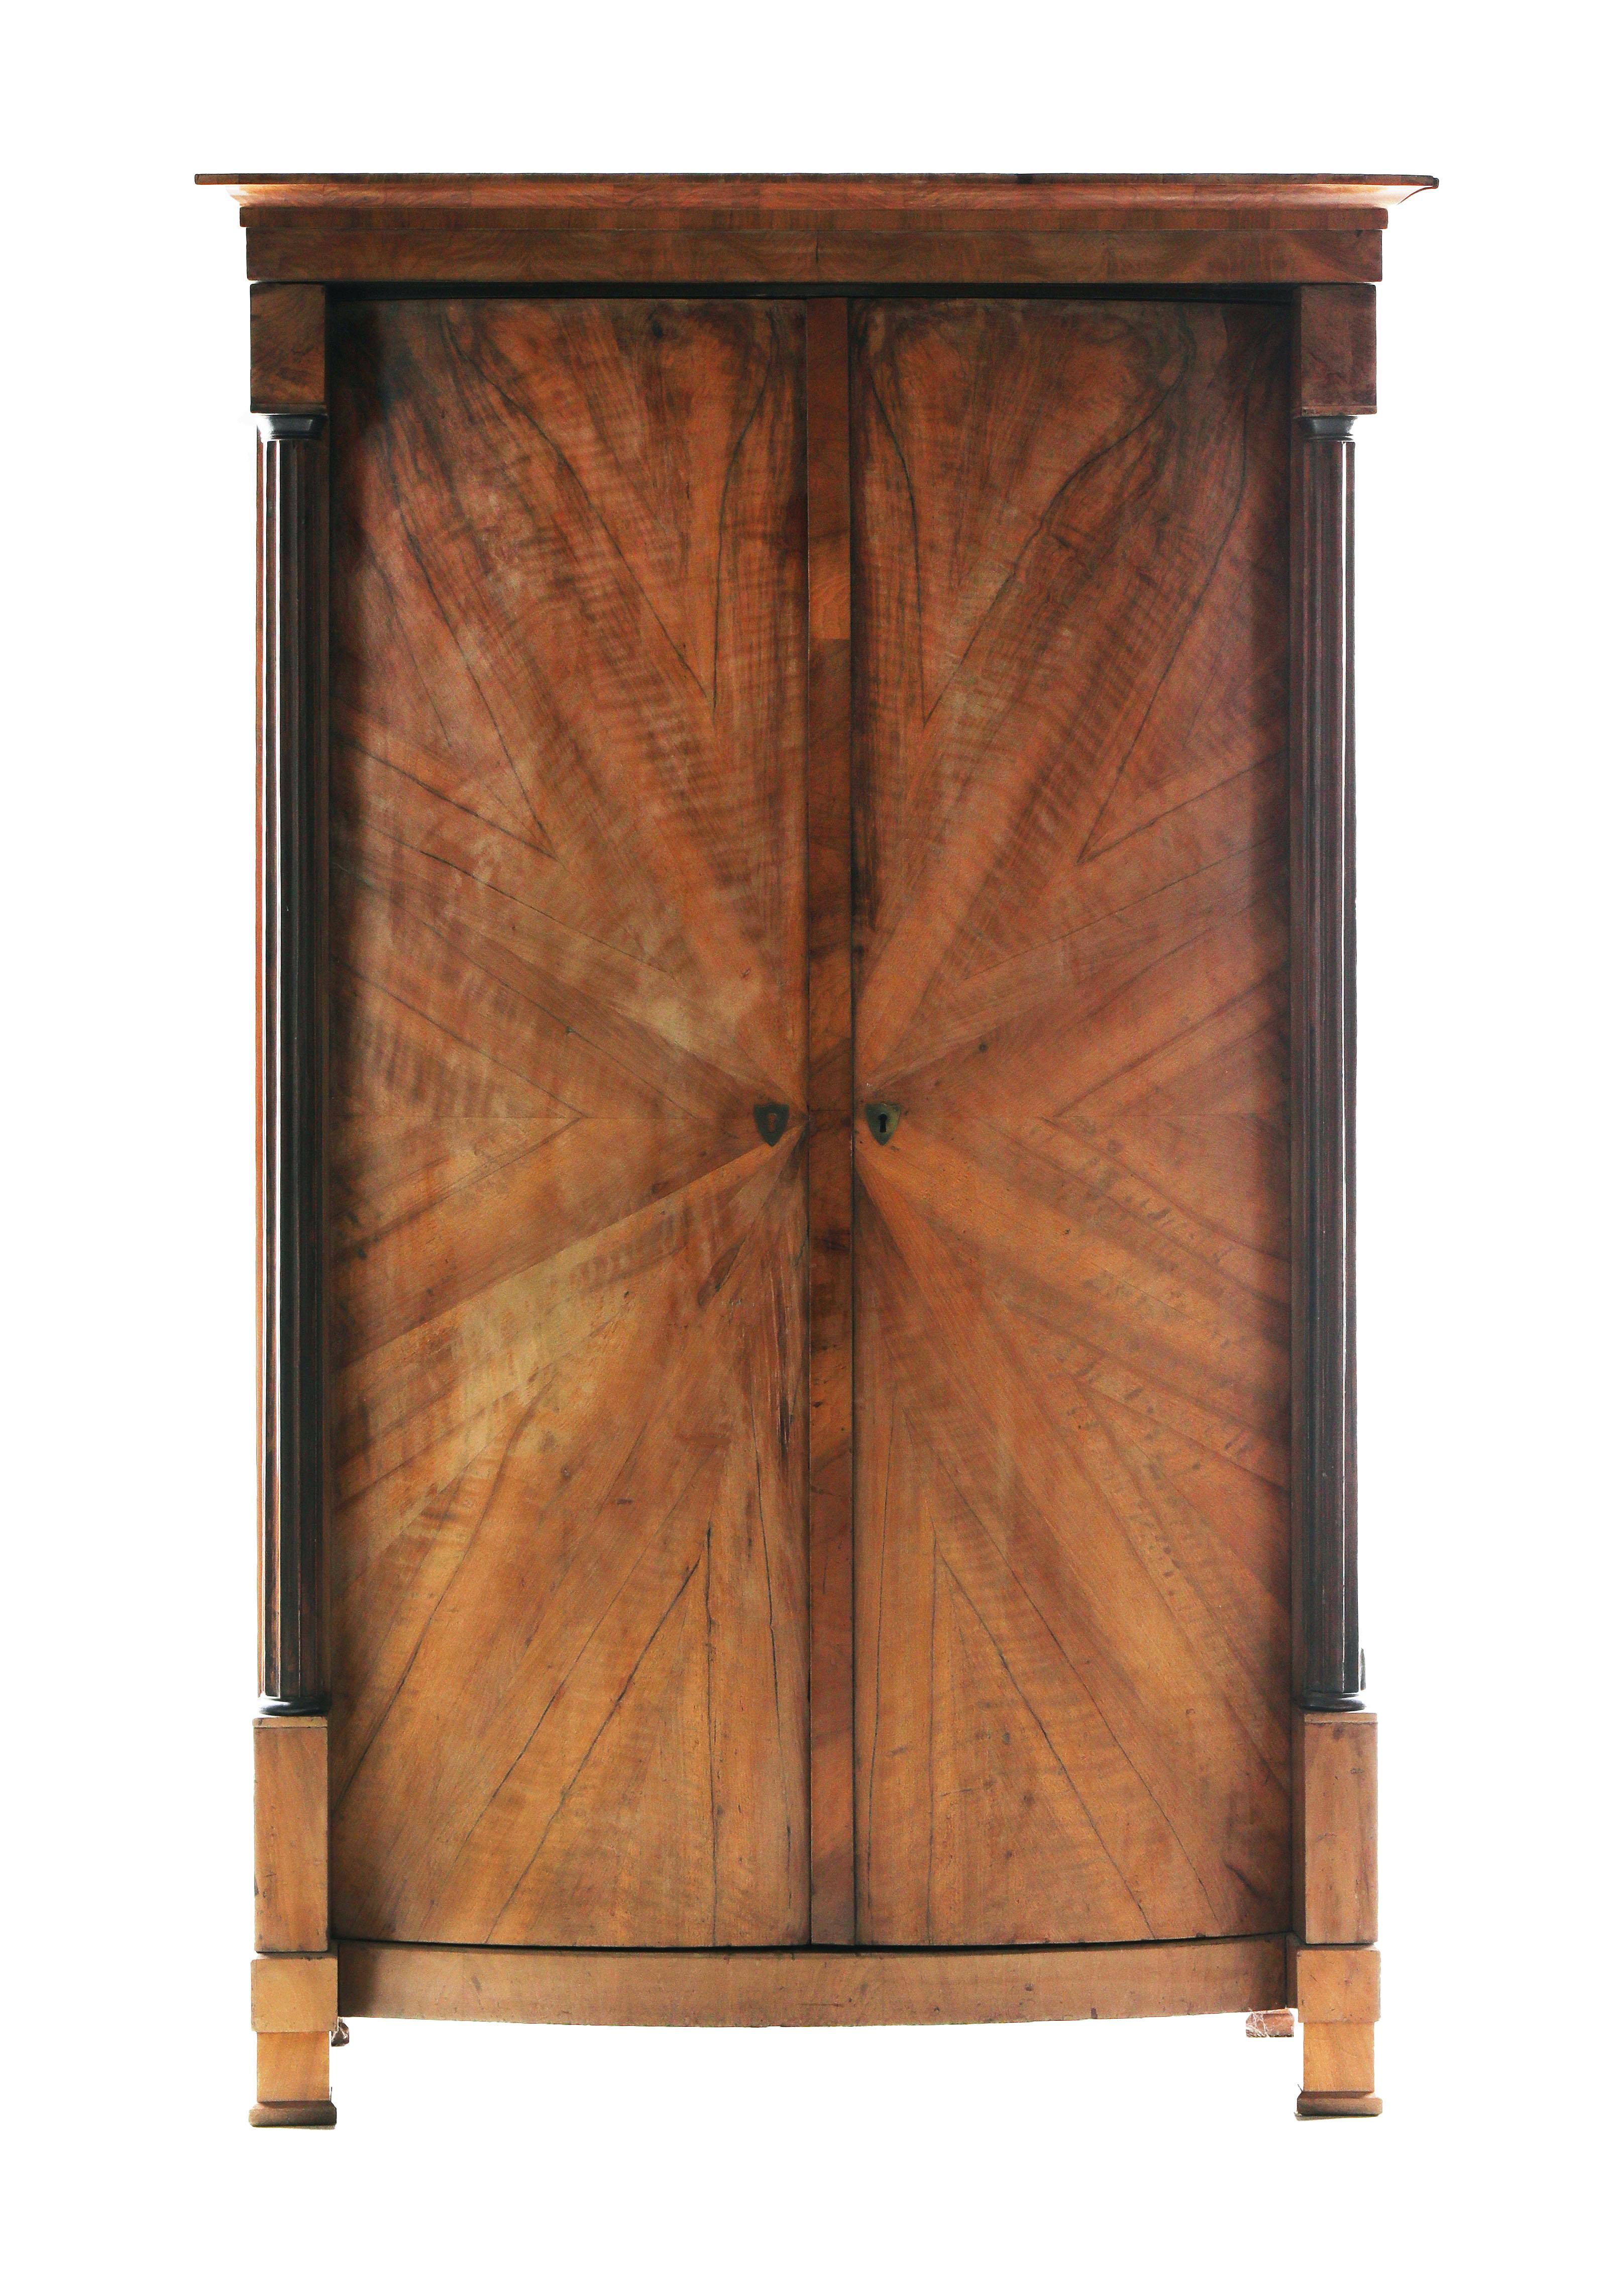 Hello,
We would like to offer you this truly exquisite, early Biedermeier walnut armoire. The piece was made in Vienna circa 1825.

Viennese Biedermeier is distinguished by their sophisticated proportions, rare and refined design and excellent